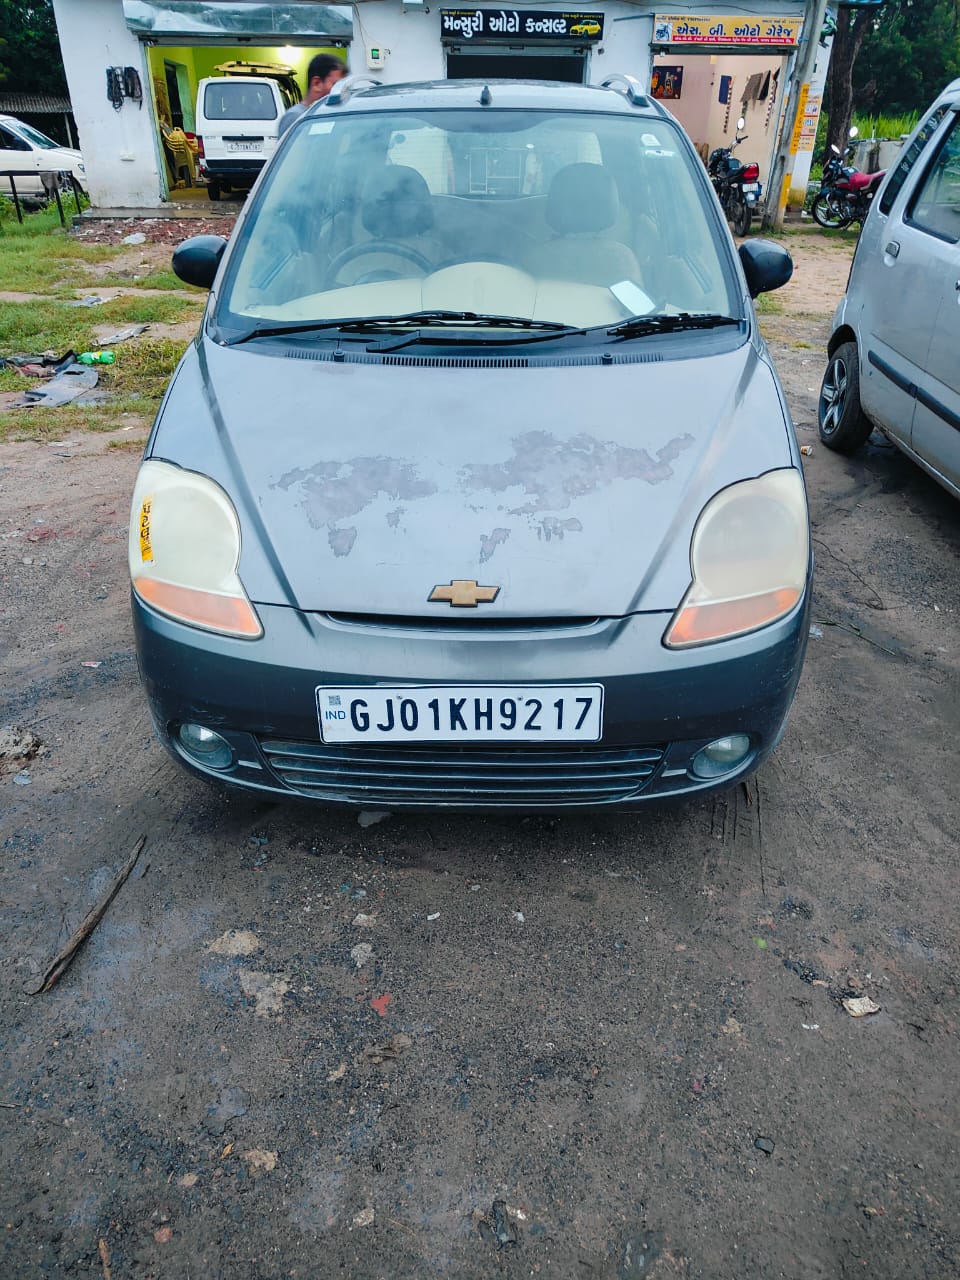 Details View - Chevrolet Spark photos - reseller,reseller marketplace,advetising your products,reseller bazzar,resellerbazzar.in,india's classified site,Chevrolet Spark , Old Chevrolet Spark , Used Chevrolet Spark  in Ahmedabad , Chevrolet Spark  in Ahmedabad